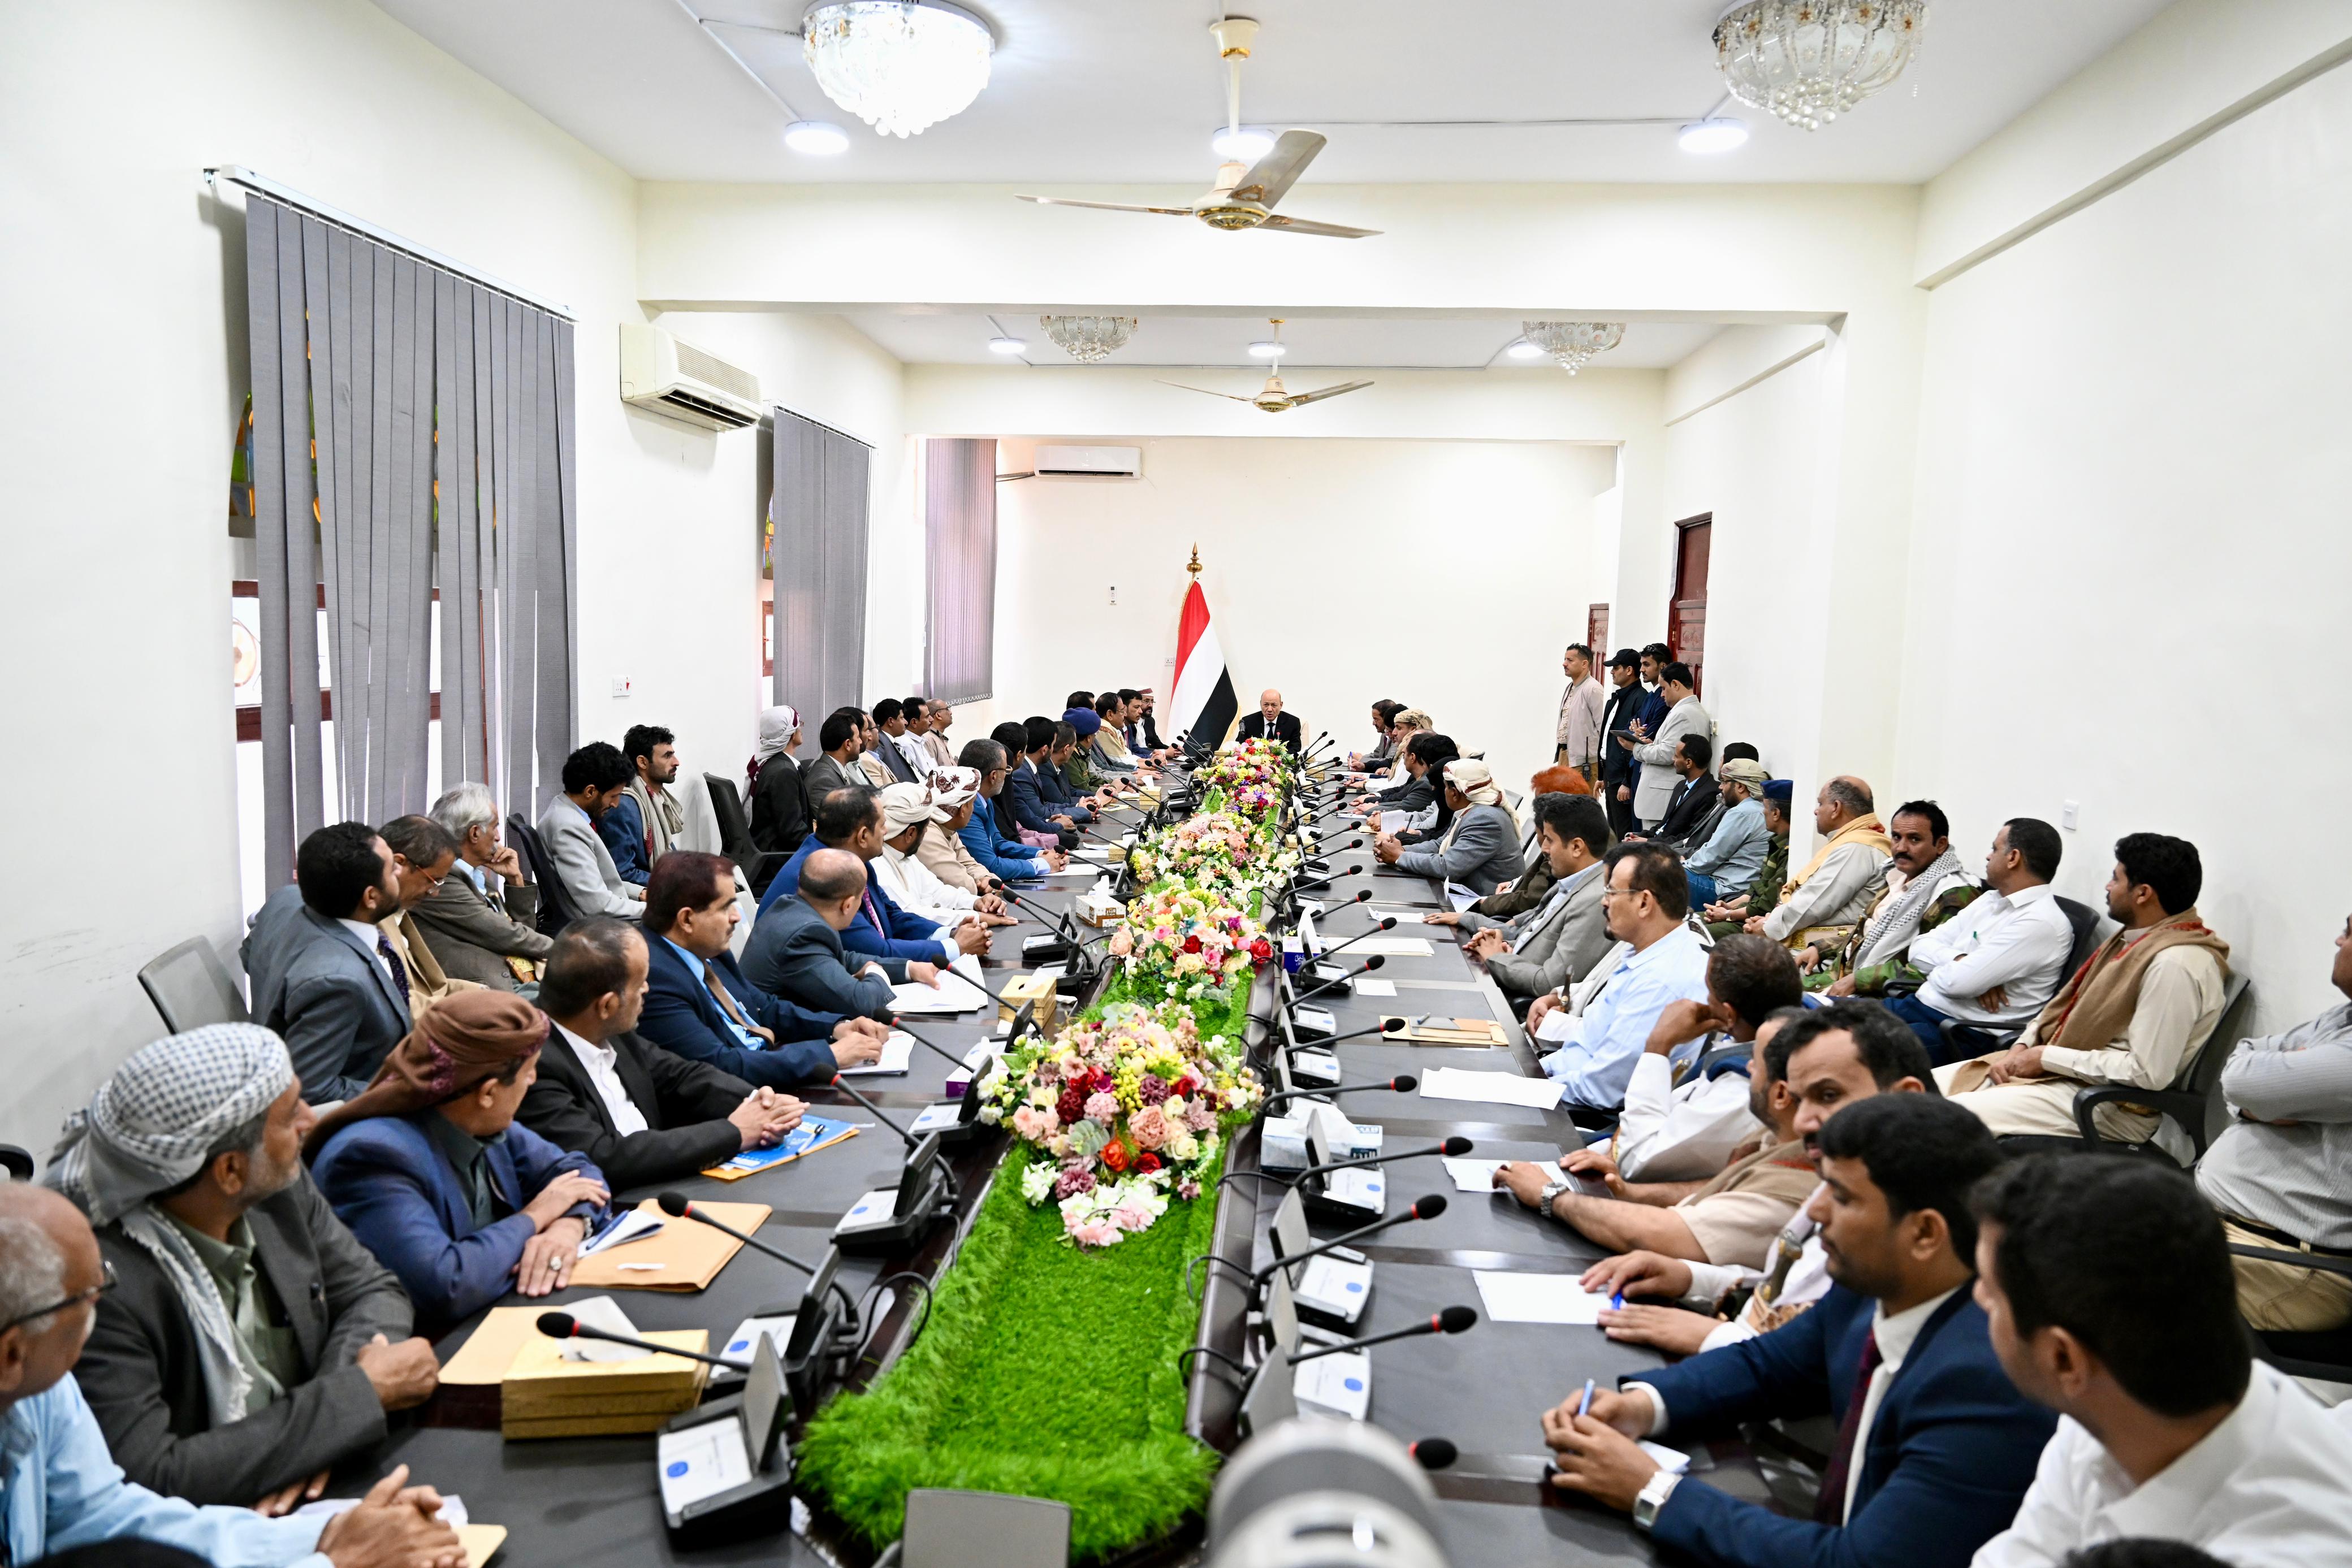 President Al-Alimi chairs a meeting with leaders of local authority and its executive bodies in Ma’rib